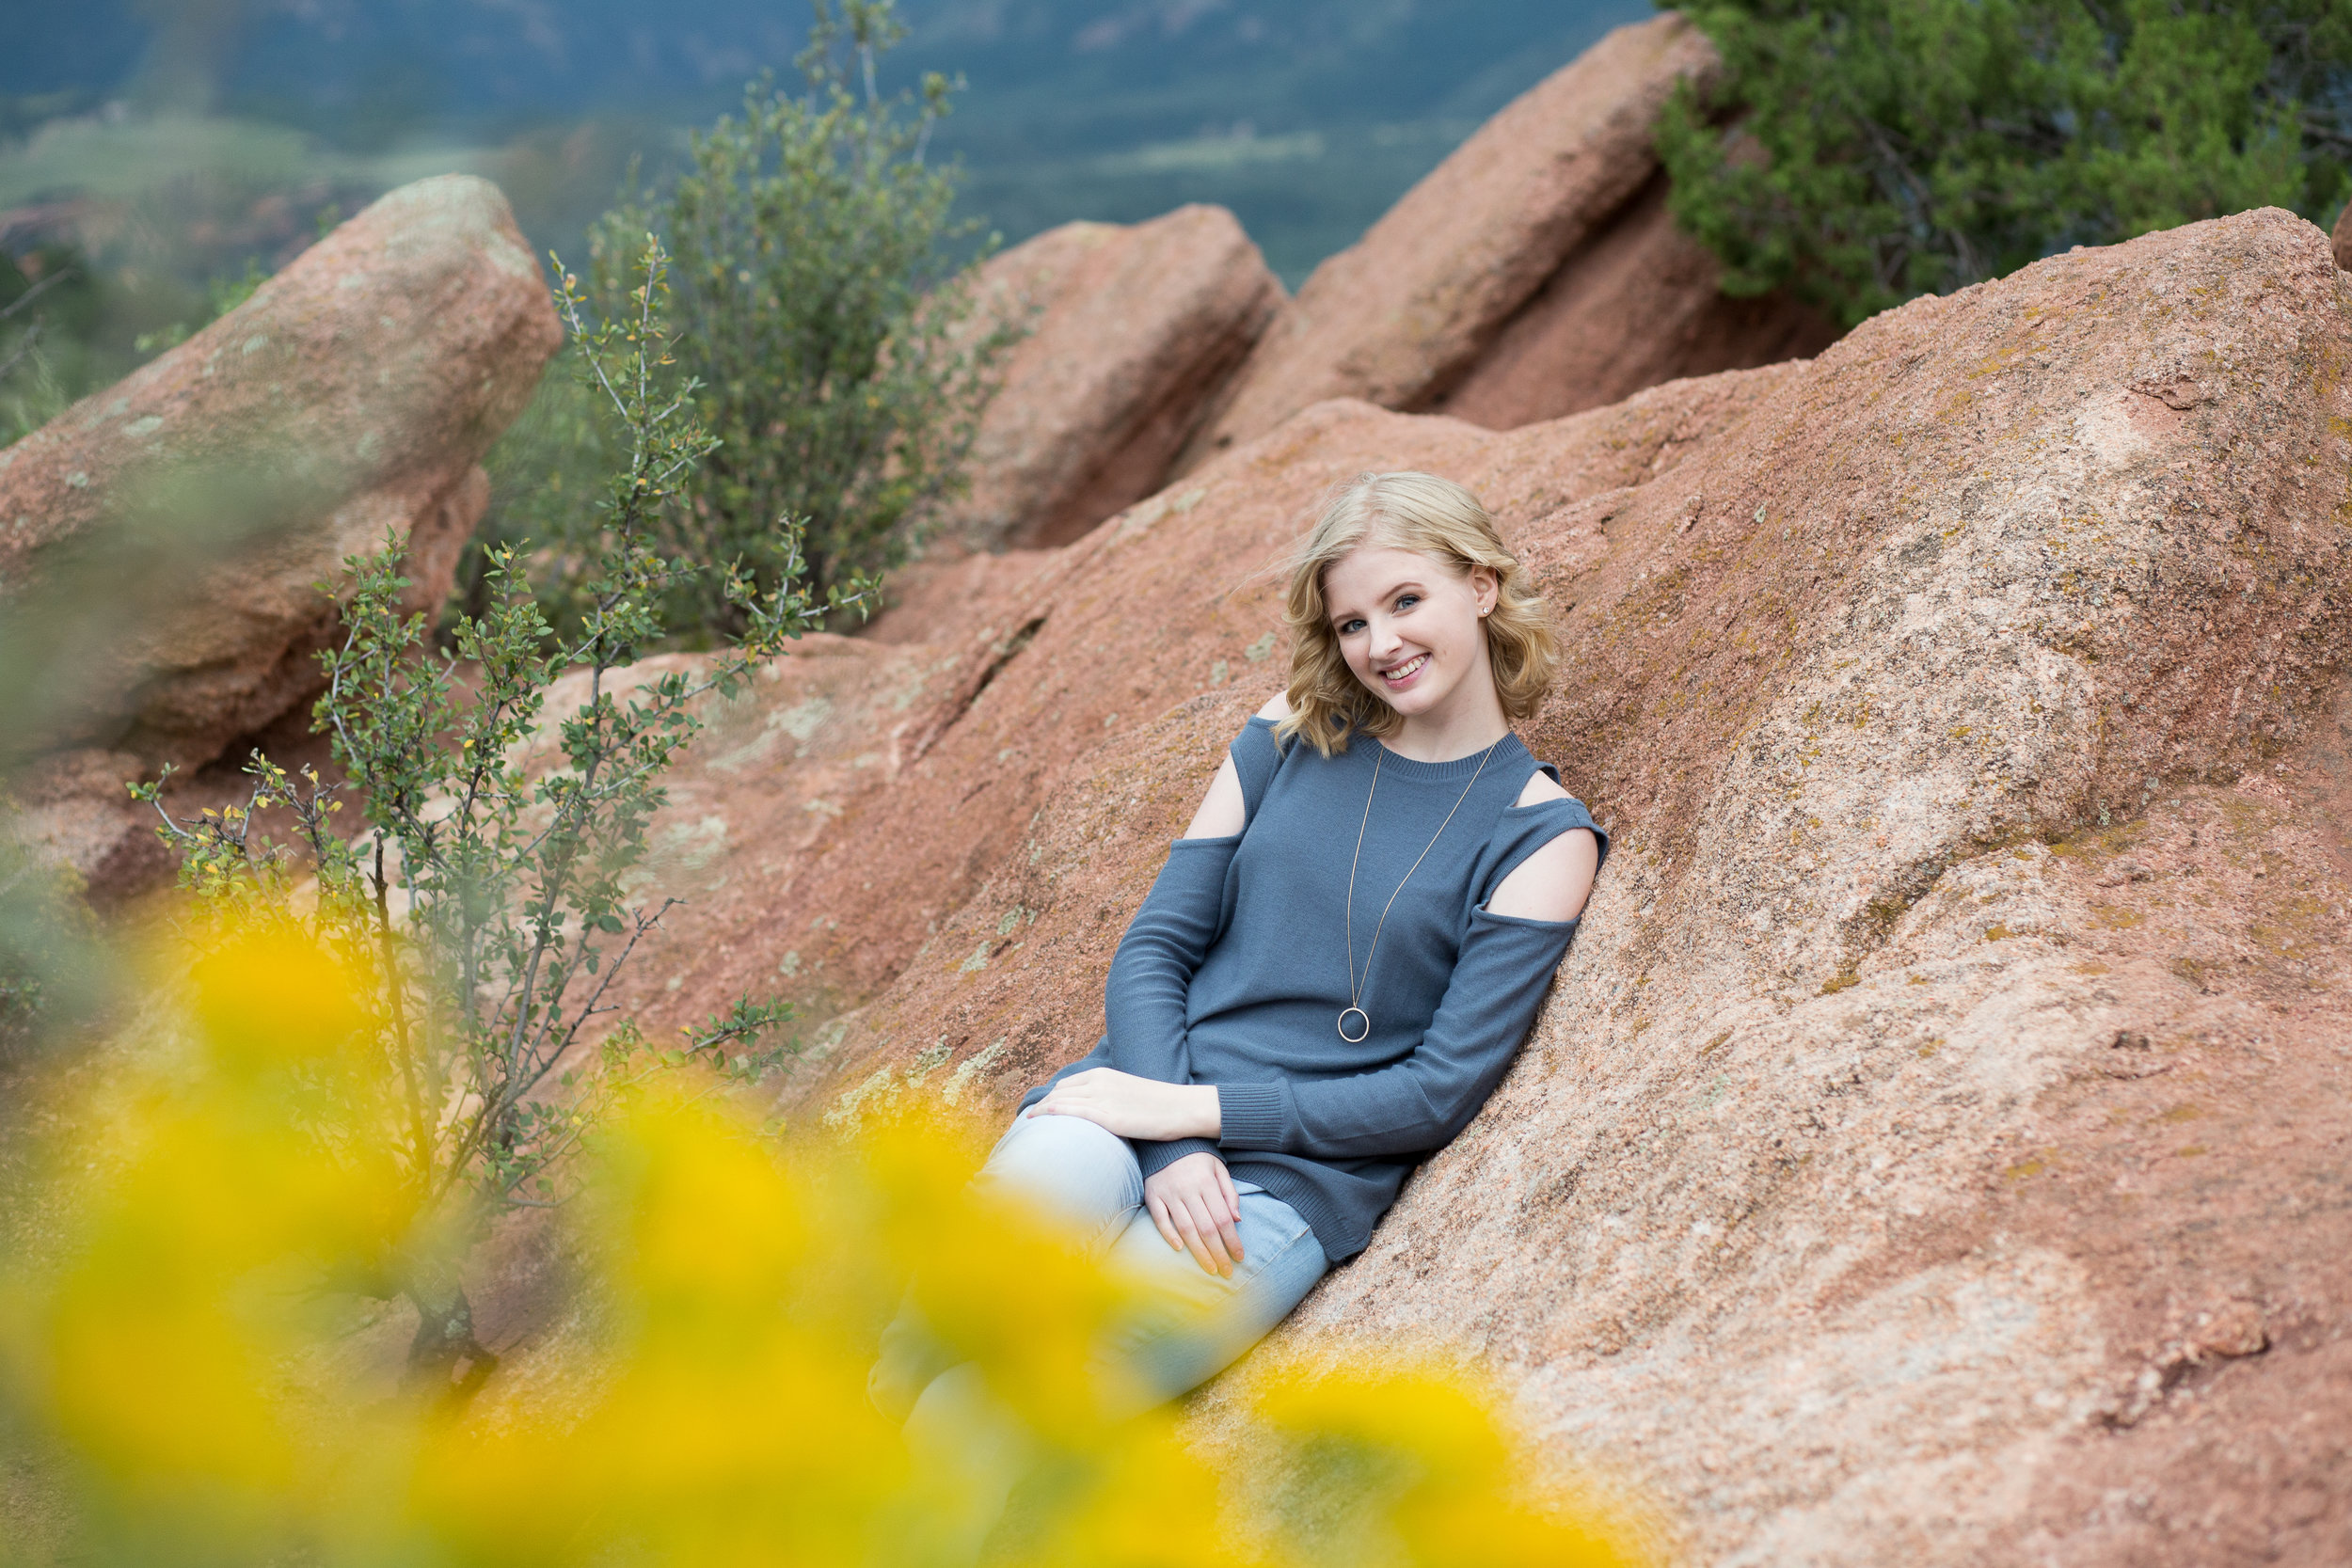 Yellow flowers in the foreground and senior girl leaning against red rock in Garden of the Gods park, Stacy Carosa Photography, Colorado Springs